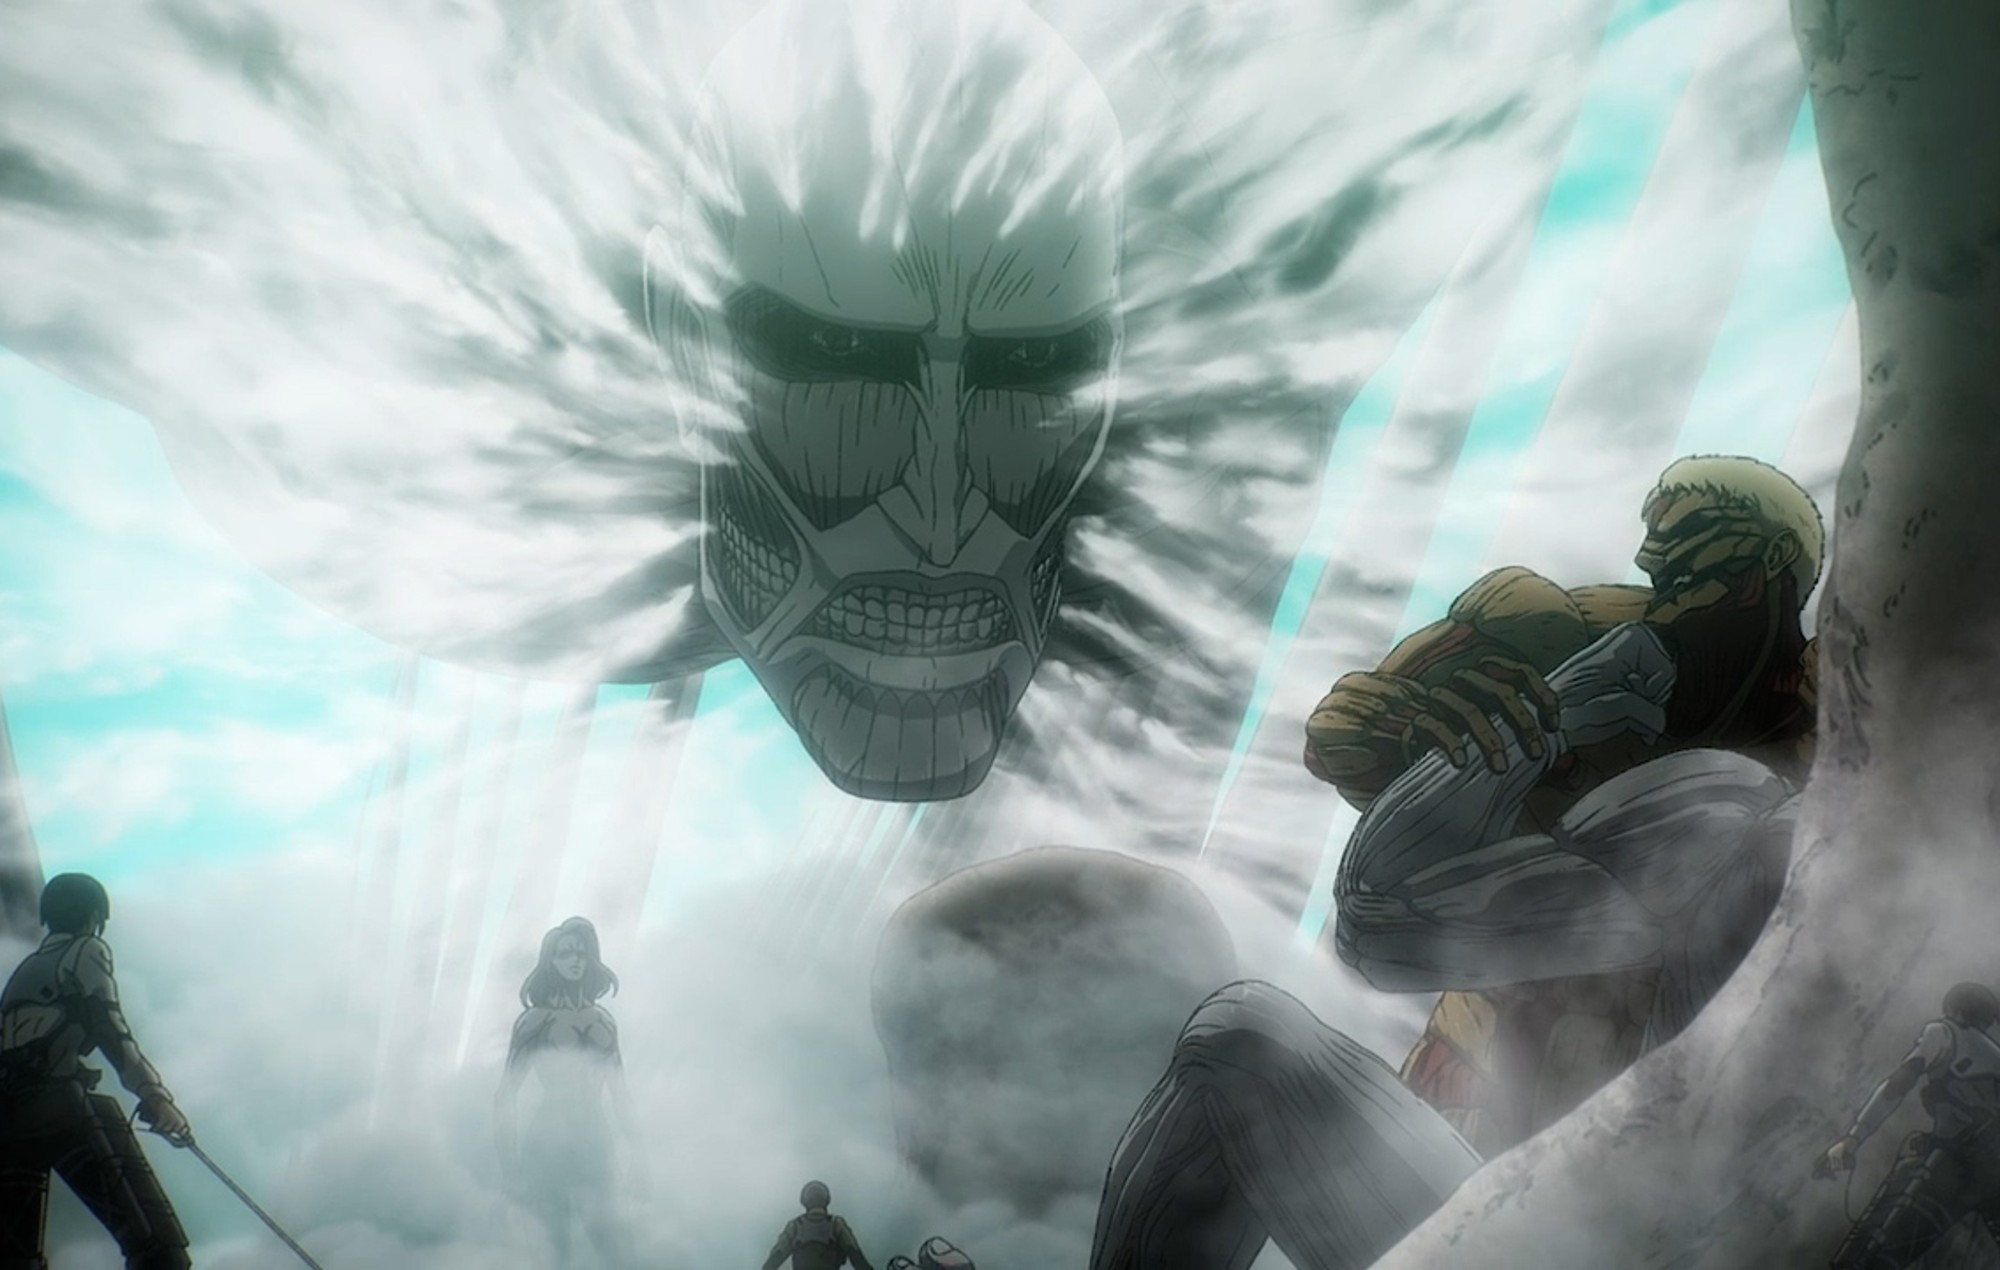 ‘Attack On Titan’ creator explains why happy ending was “not plausible”